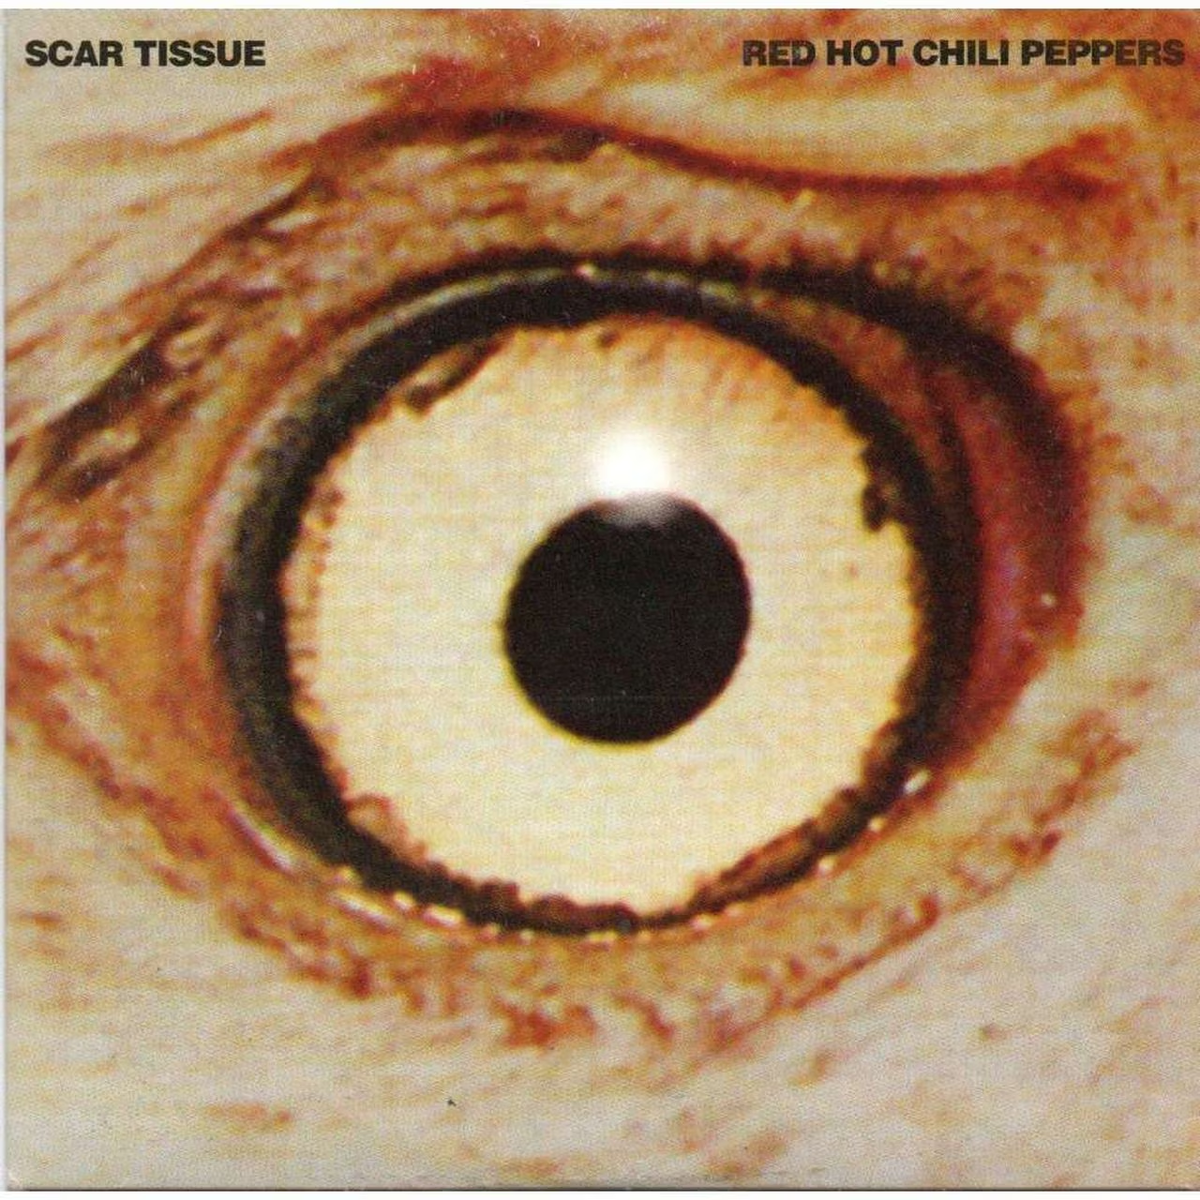 Red hot chili peppers scar. Scar Tissue Red hot Chili Peppers. Scar Tissue Red hot Chili Peppers обложка. Red hot Chili scar Tissue. Scar Tissue Red hot Chili Peppers клип.